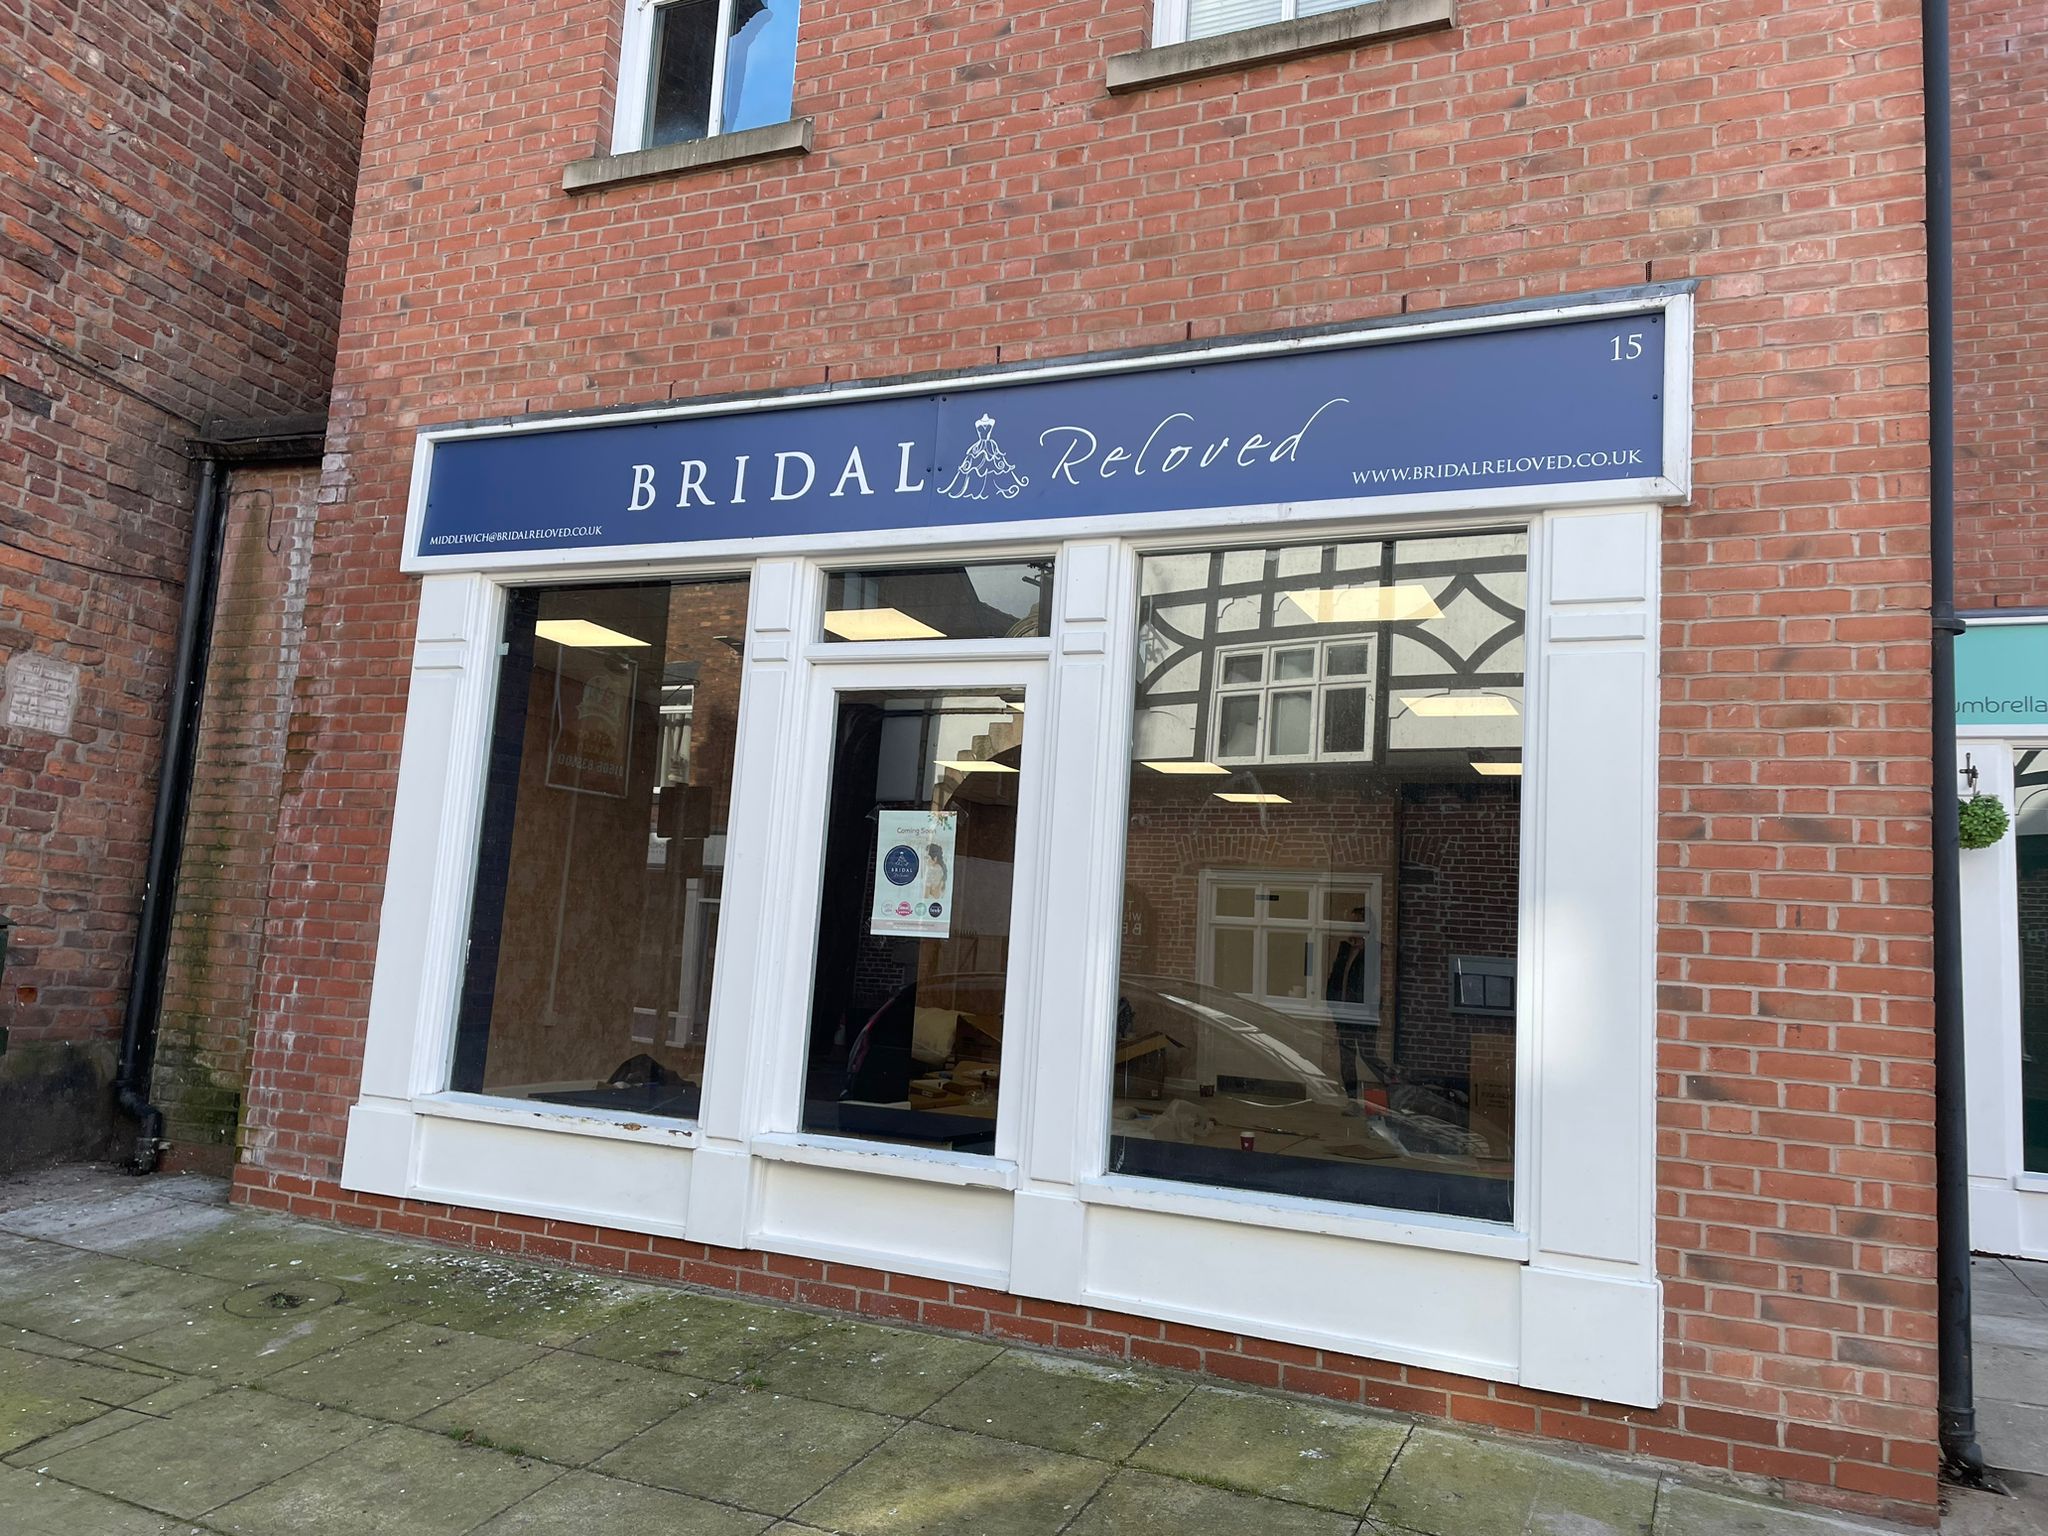 Retail & Shop frontage signs